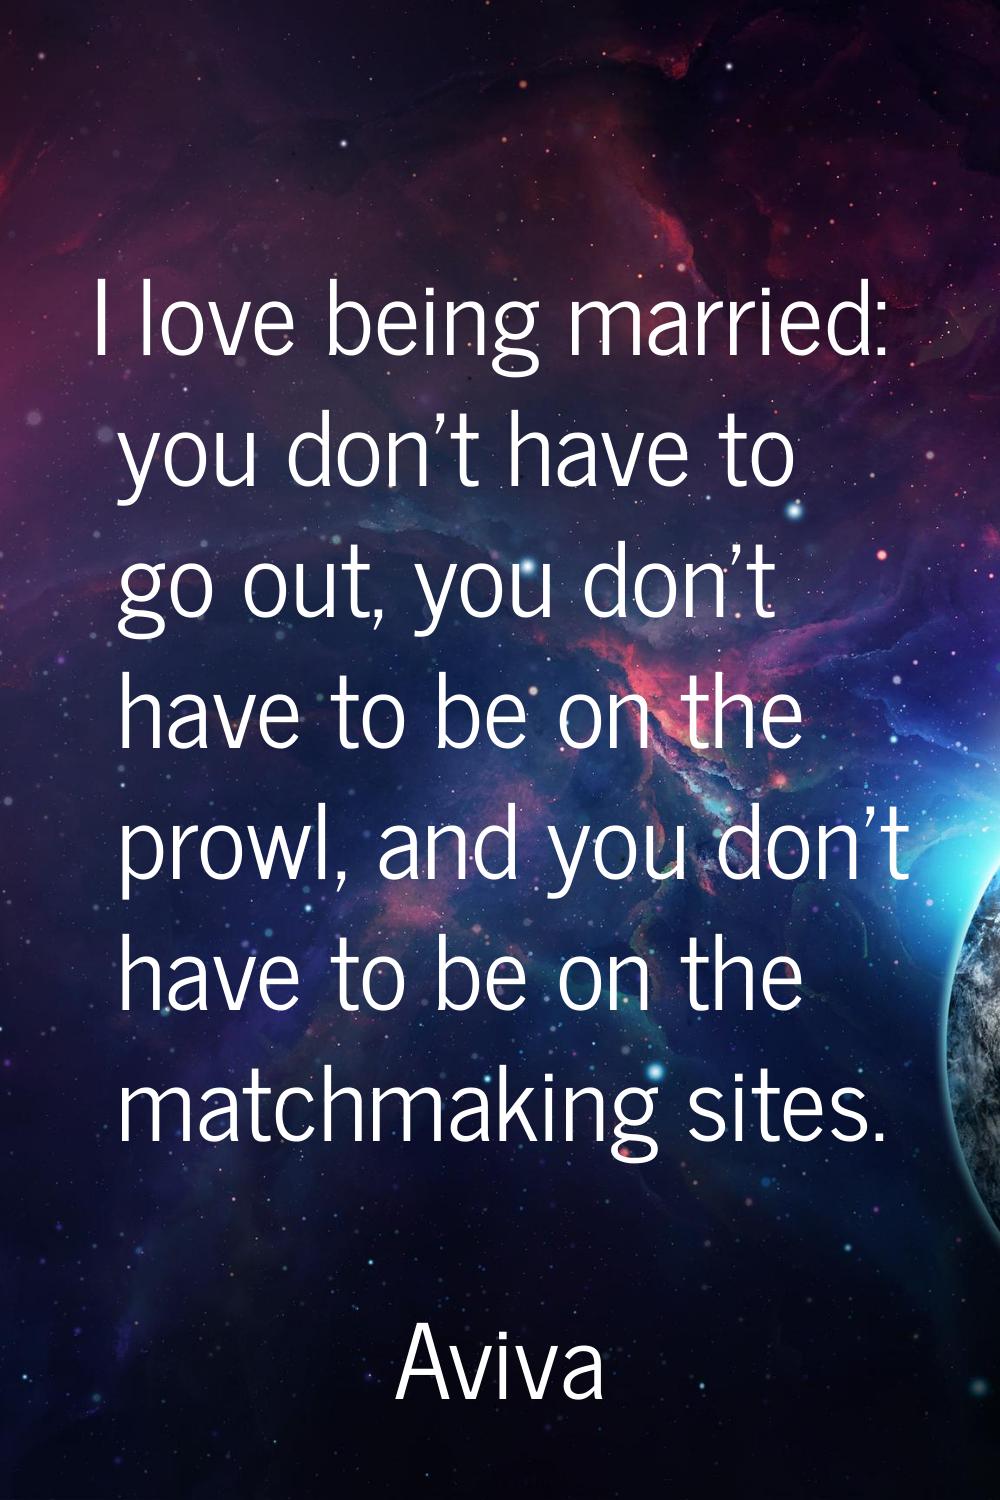 I love being married: you don't have to go out, you don't have to be on the prowl, and you don't ha